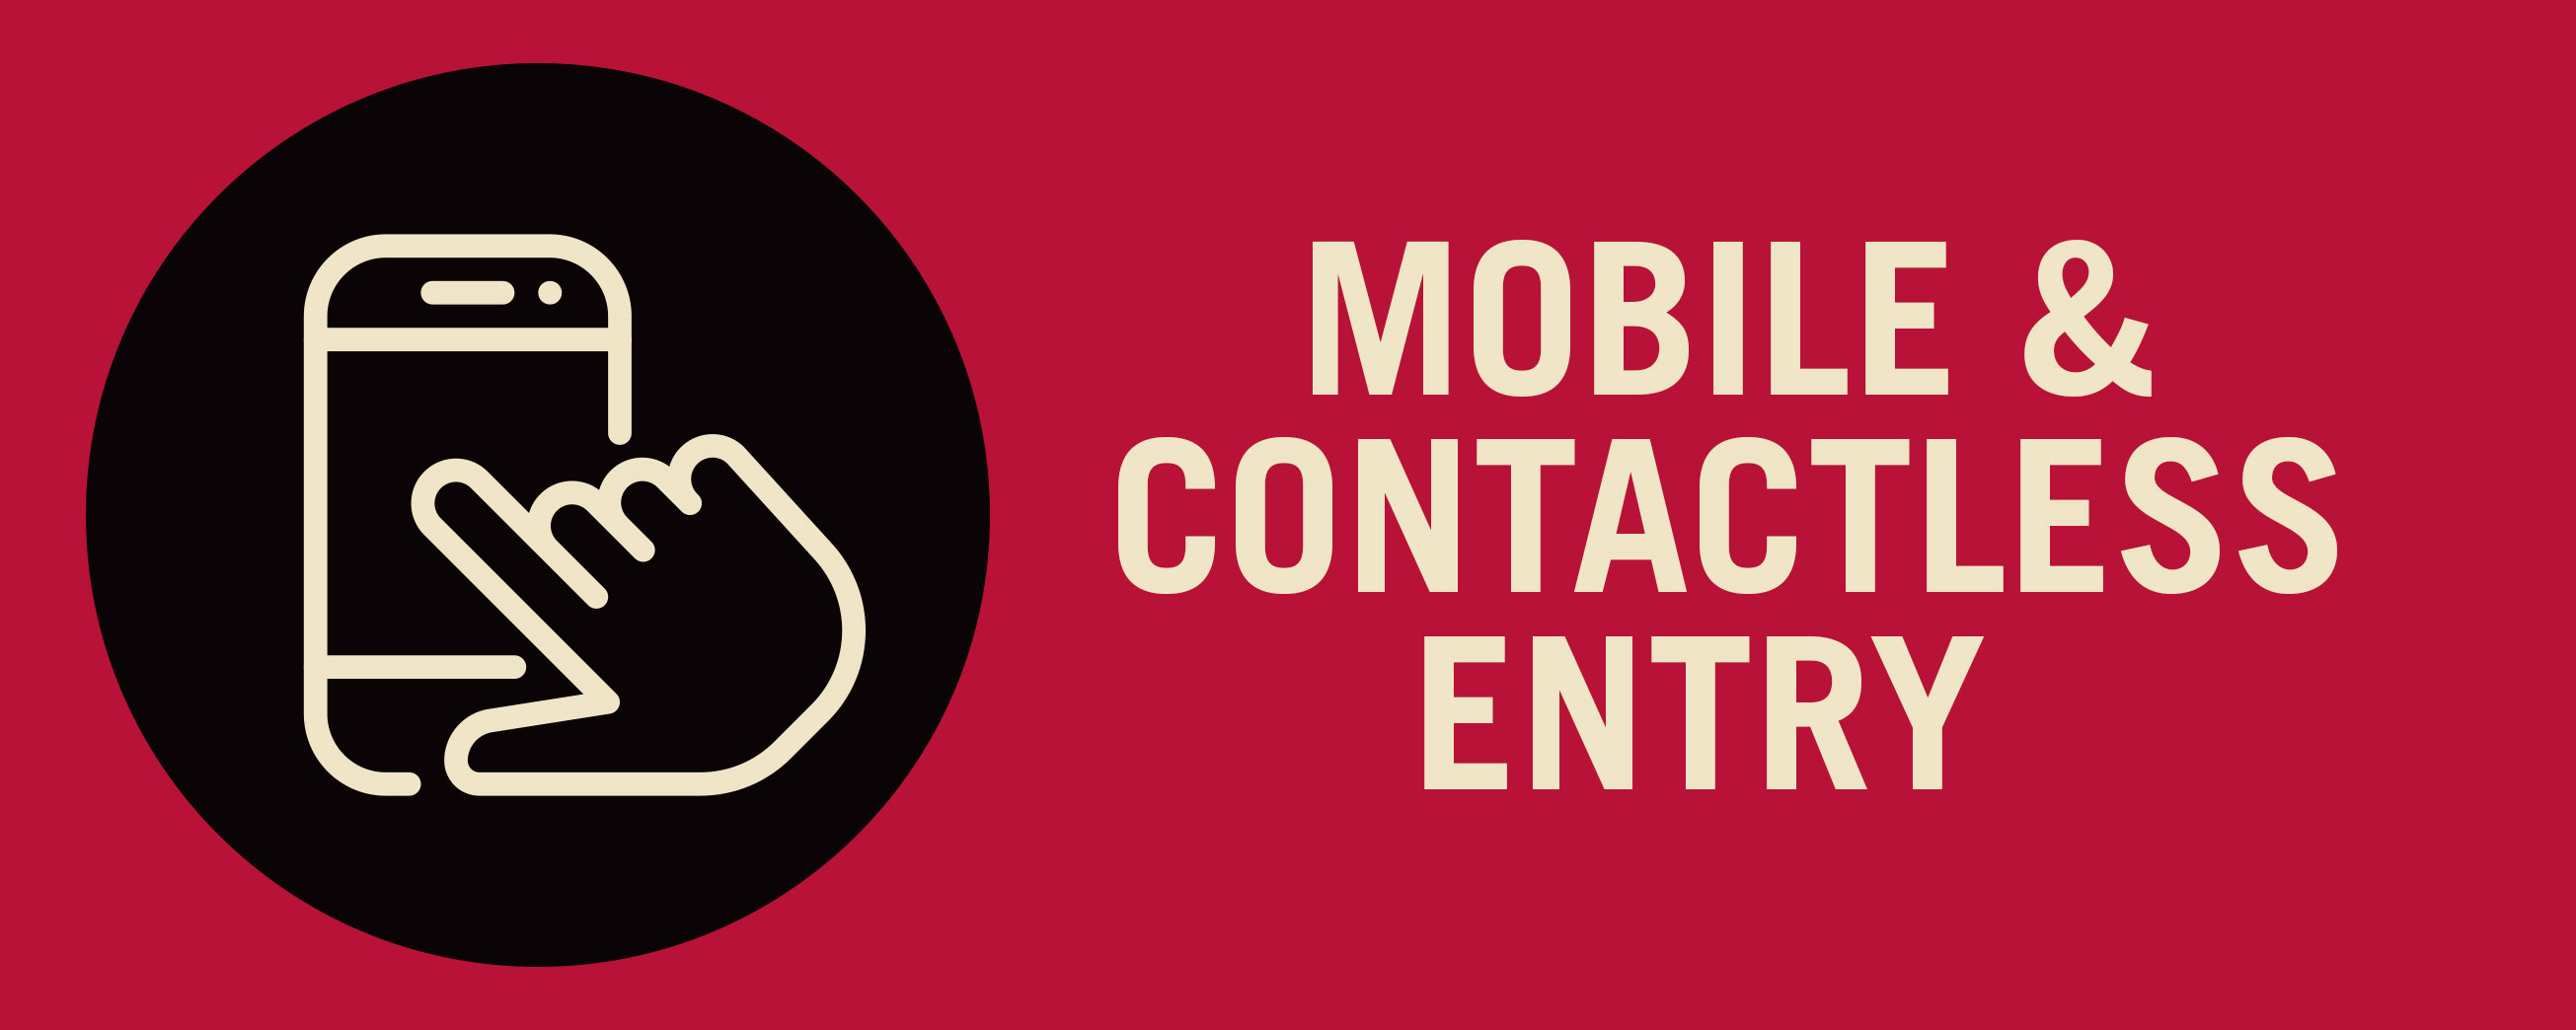 Mobile & Contactless Entry